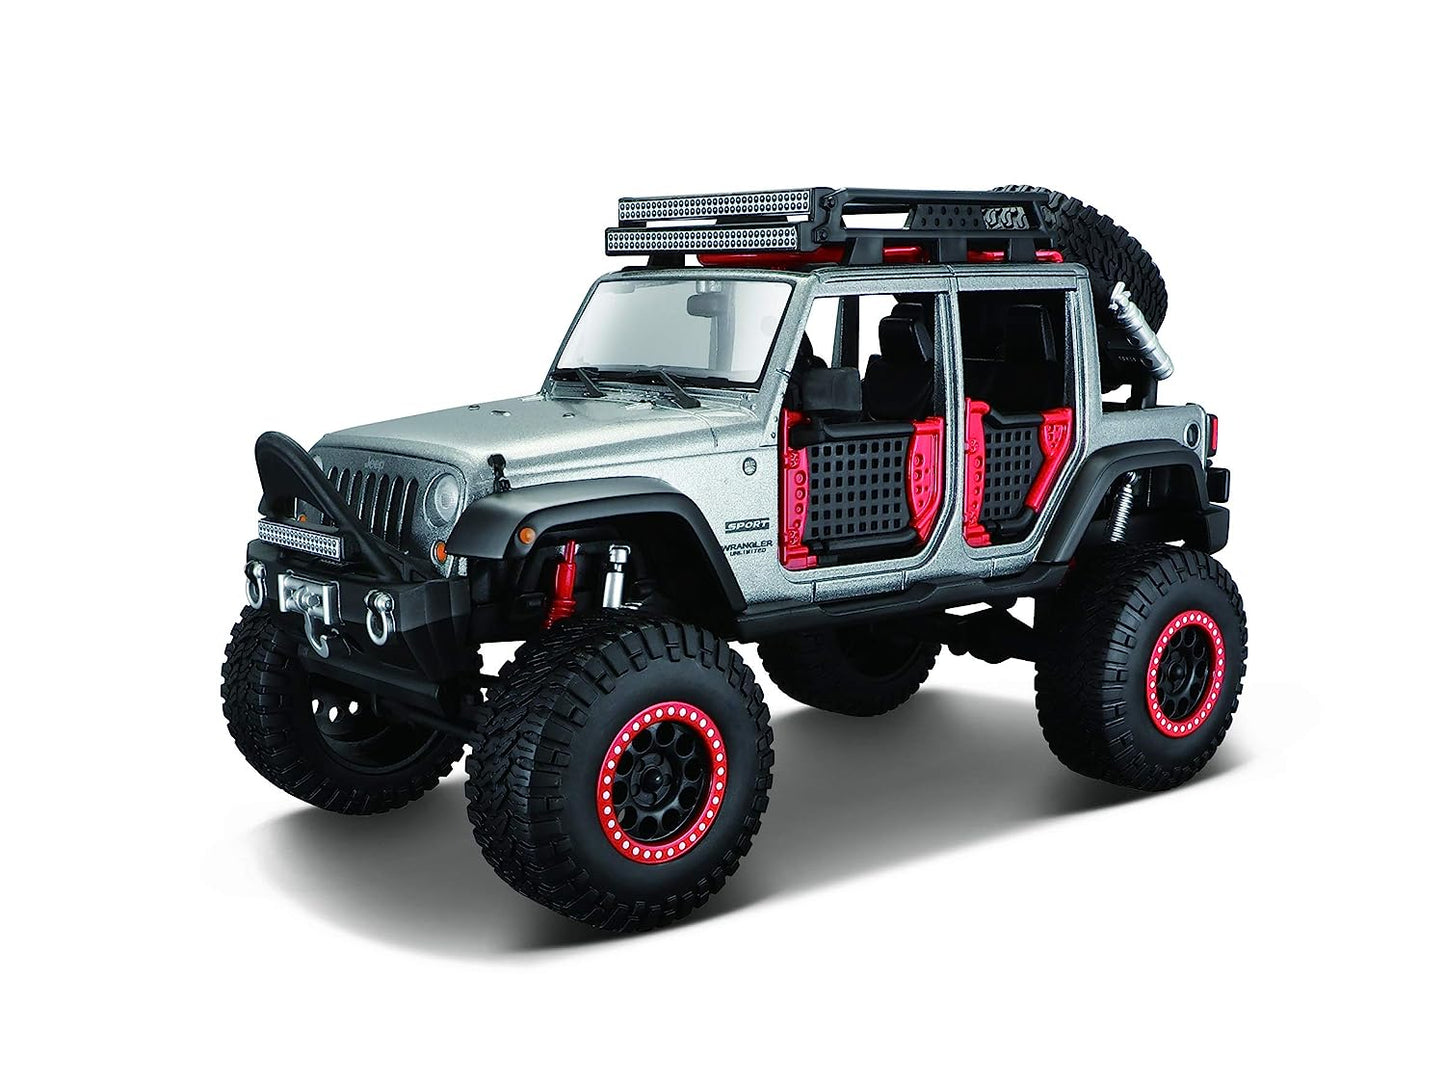 Jeep Wrangler Moist 1:24 Scale Die cast Metal Pullback Toy car with Openable Doors & Light(Silver)